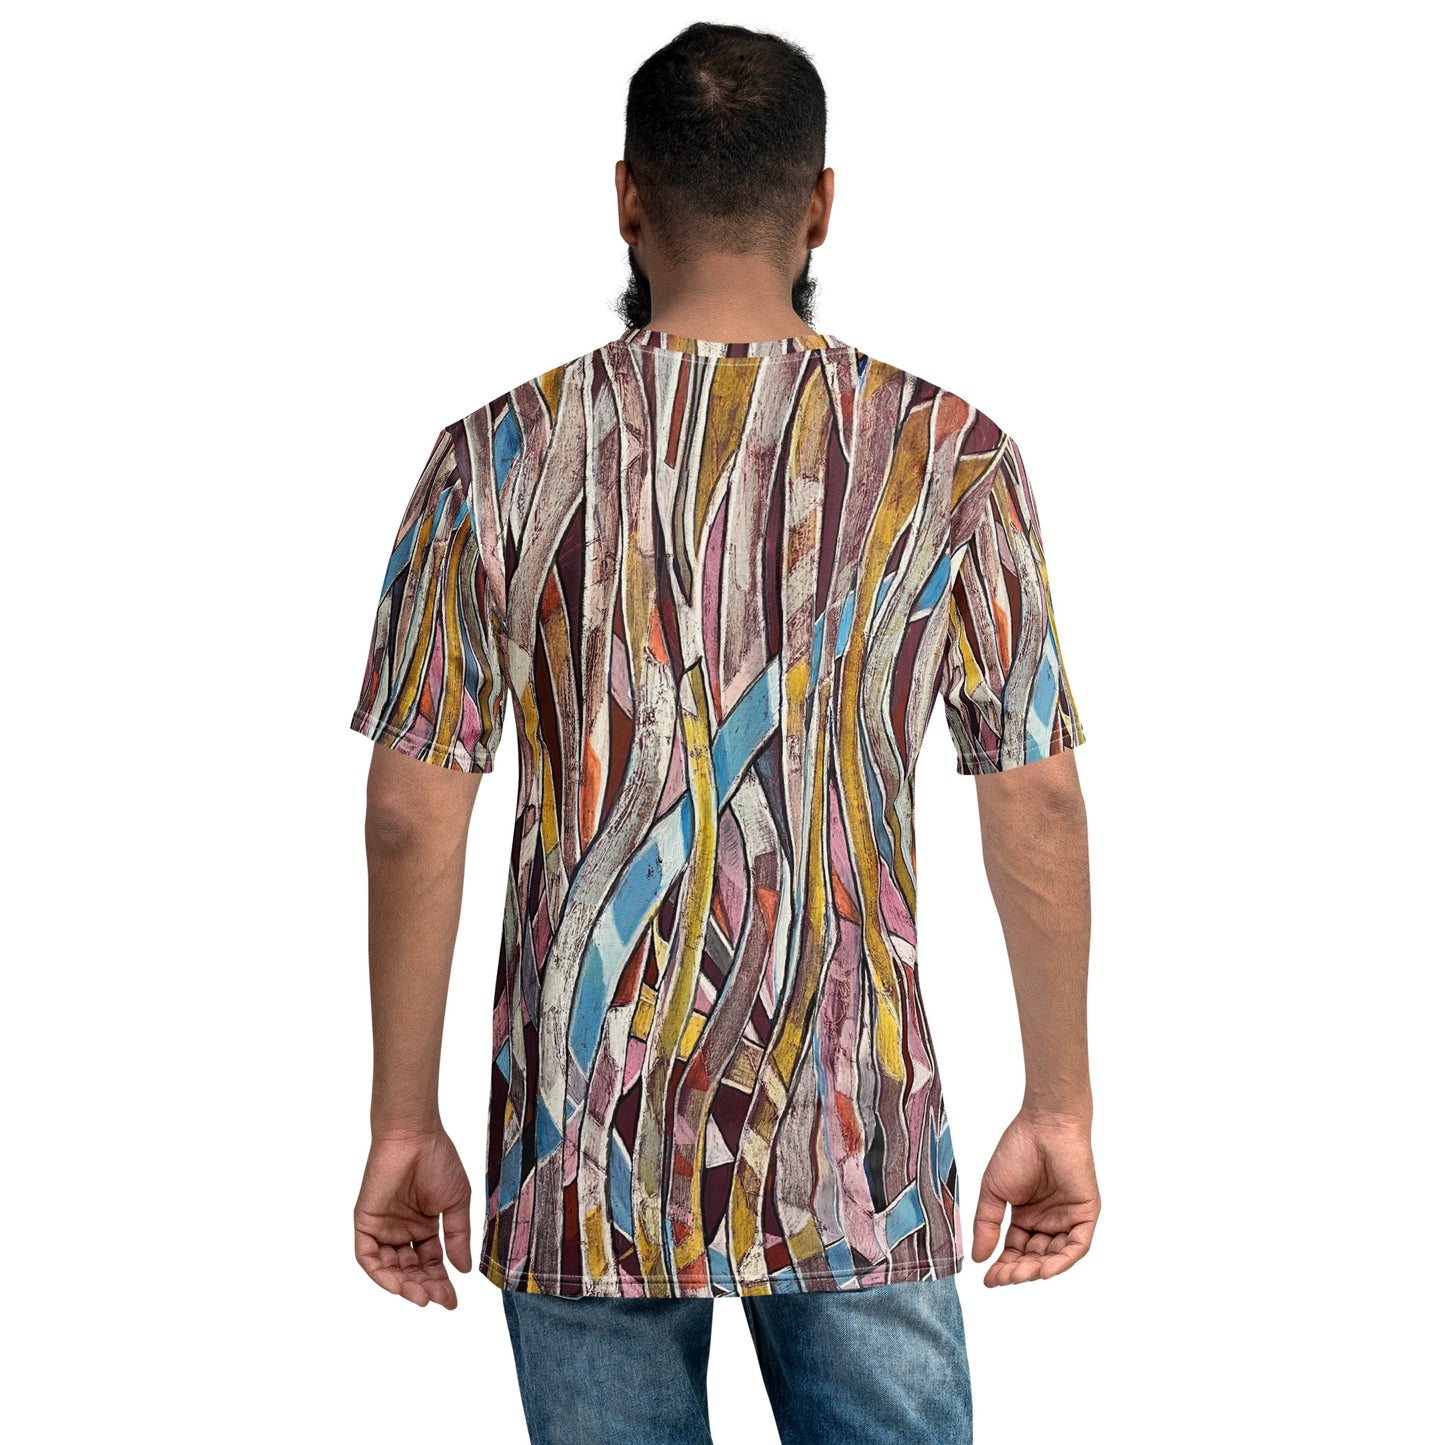 "Abstract #1" by Greg Latch t-shirt